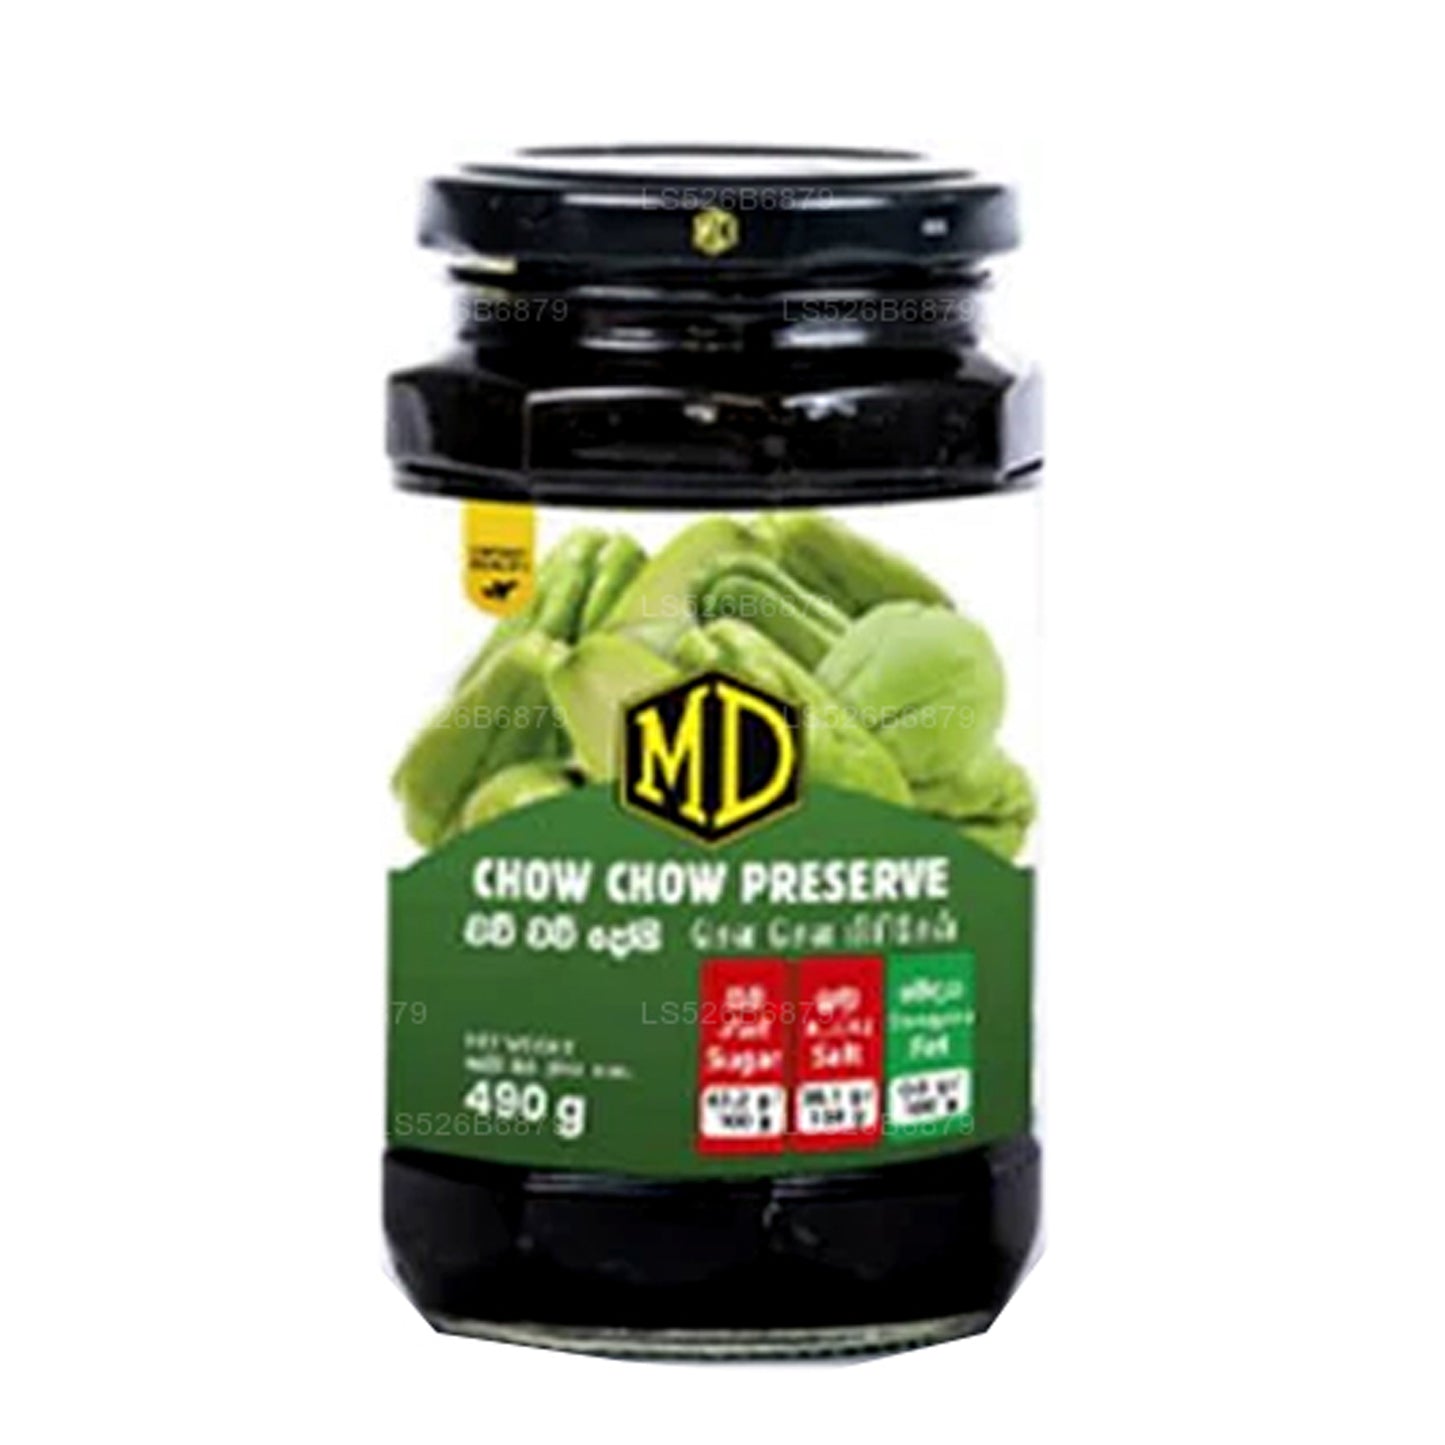 MD Chow Chow konserver (490g)